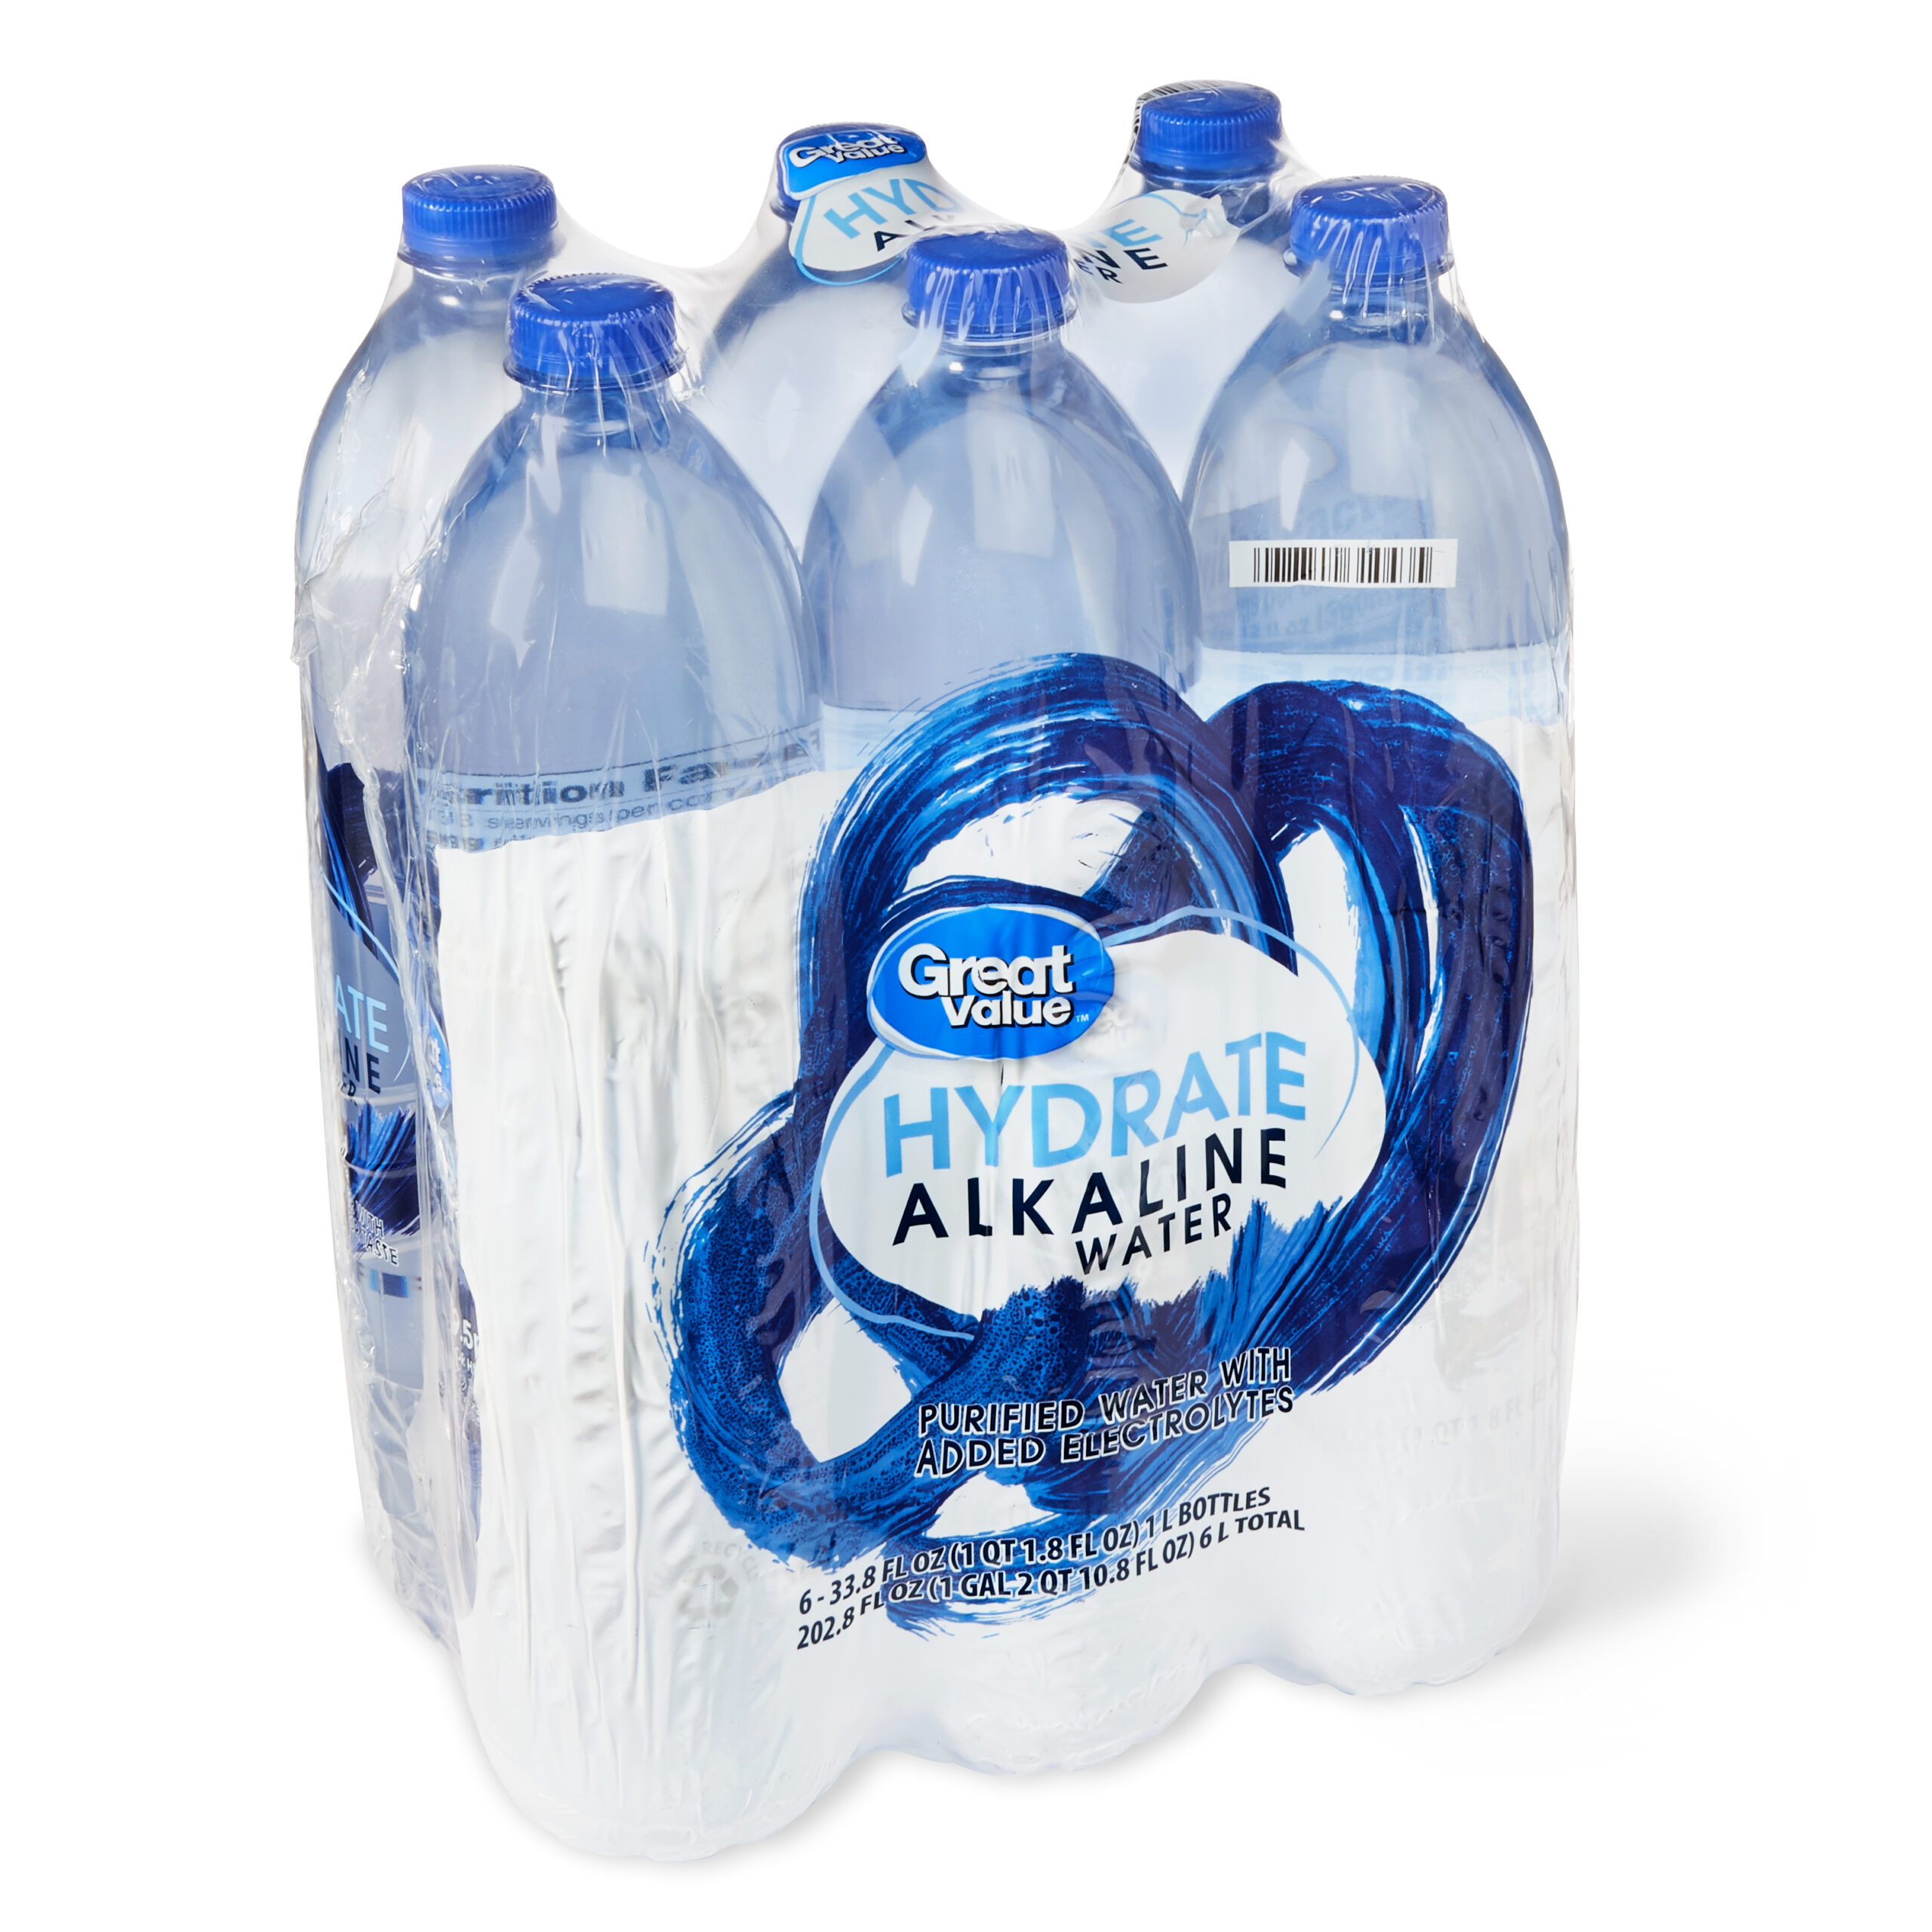 Great Value Hydrate Alkaline Water, 1L, 6 Count CrowdedLine Delivery